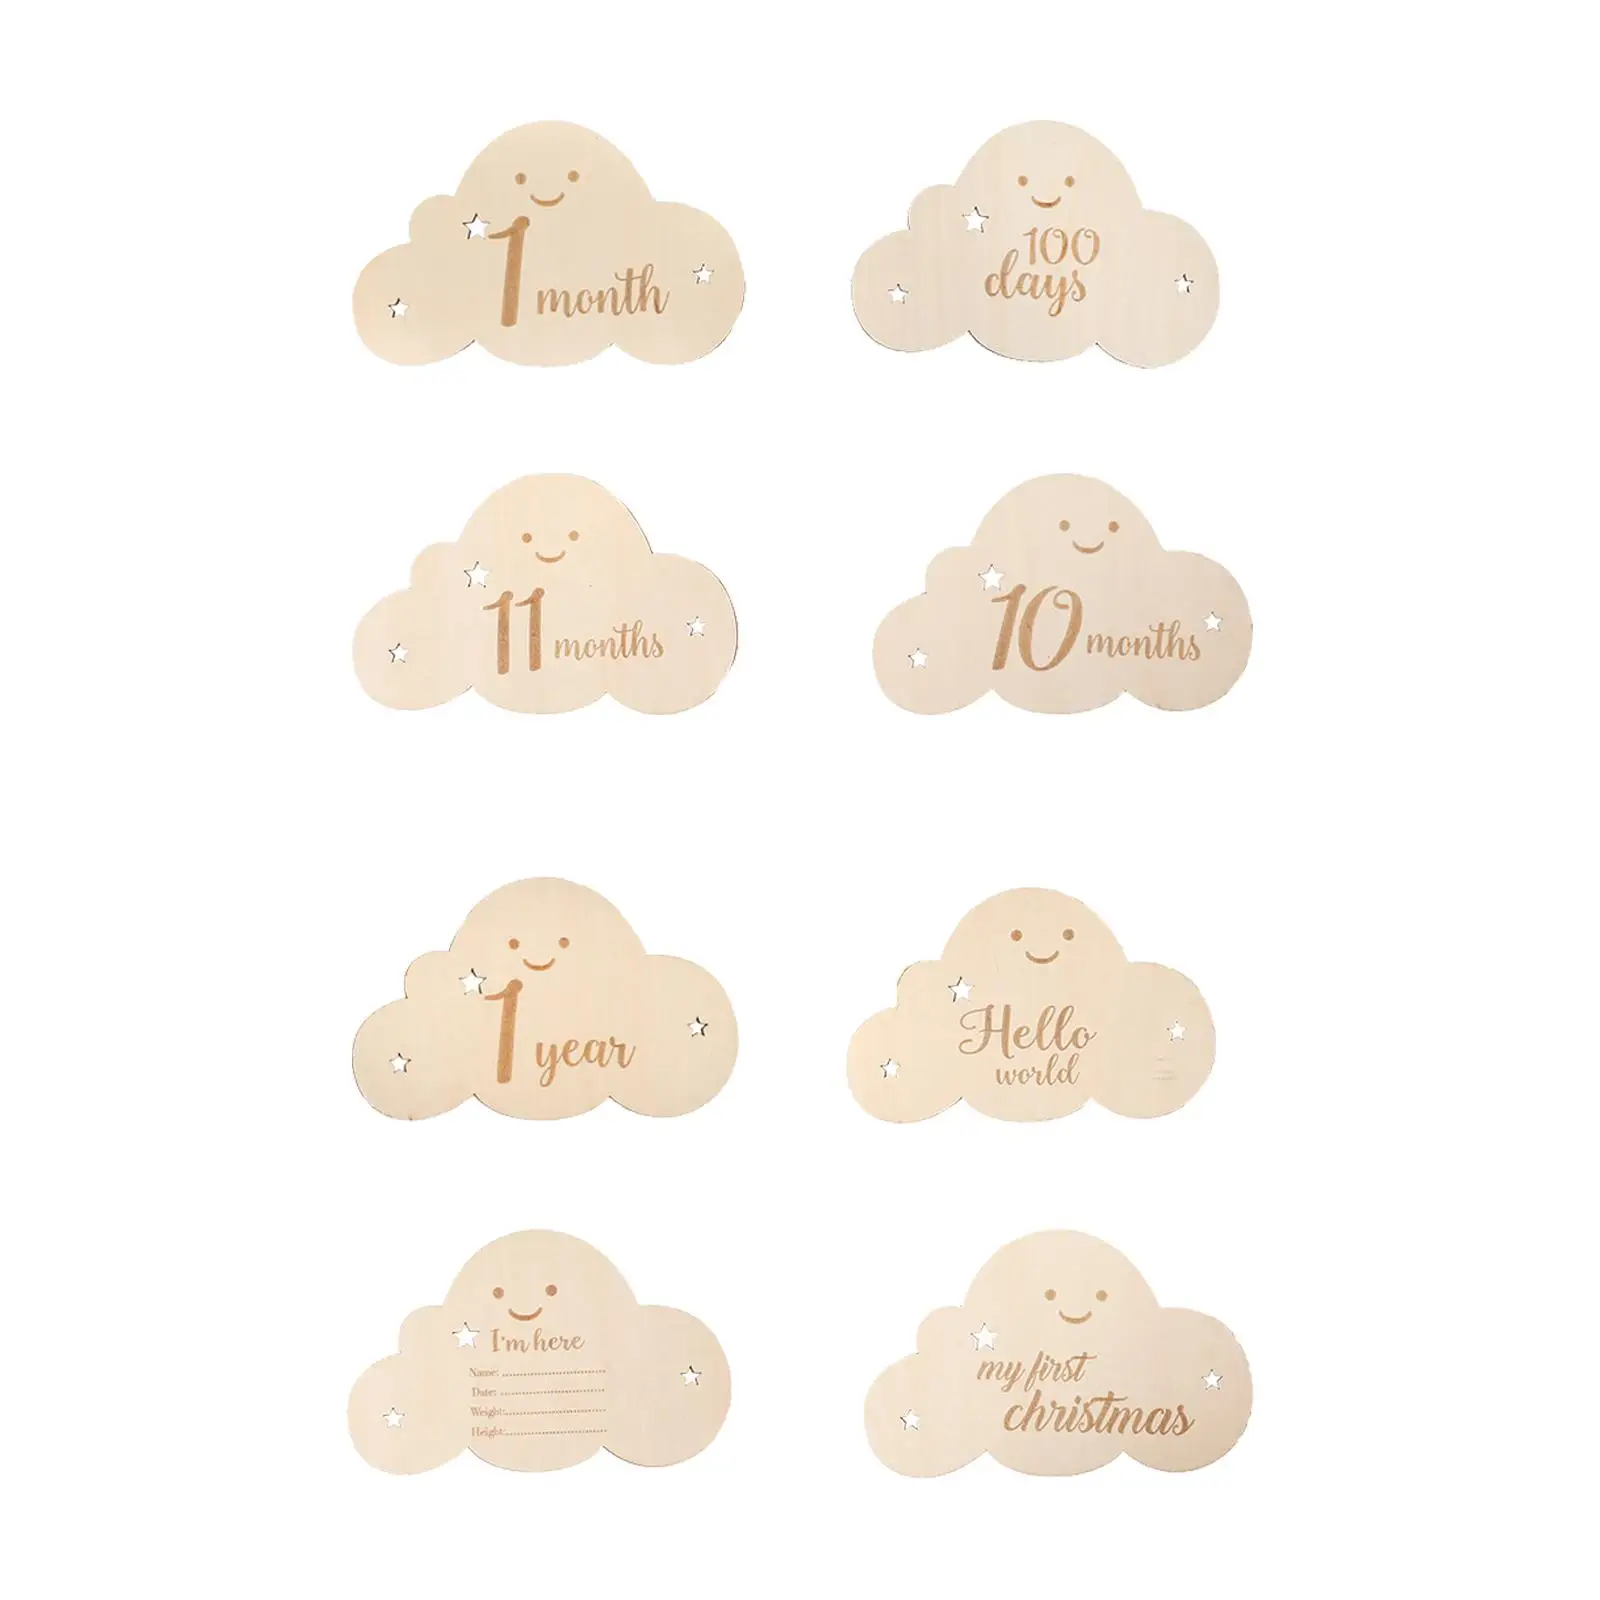 8x Baby Milestone Cards New Mom Gifts Engraved Clouds Shape Photography Accessories Newborn Gifts Double Sided Photo Prop Cards